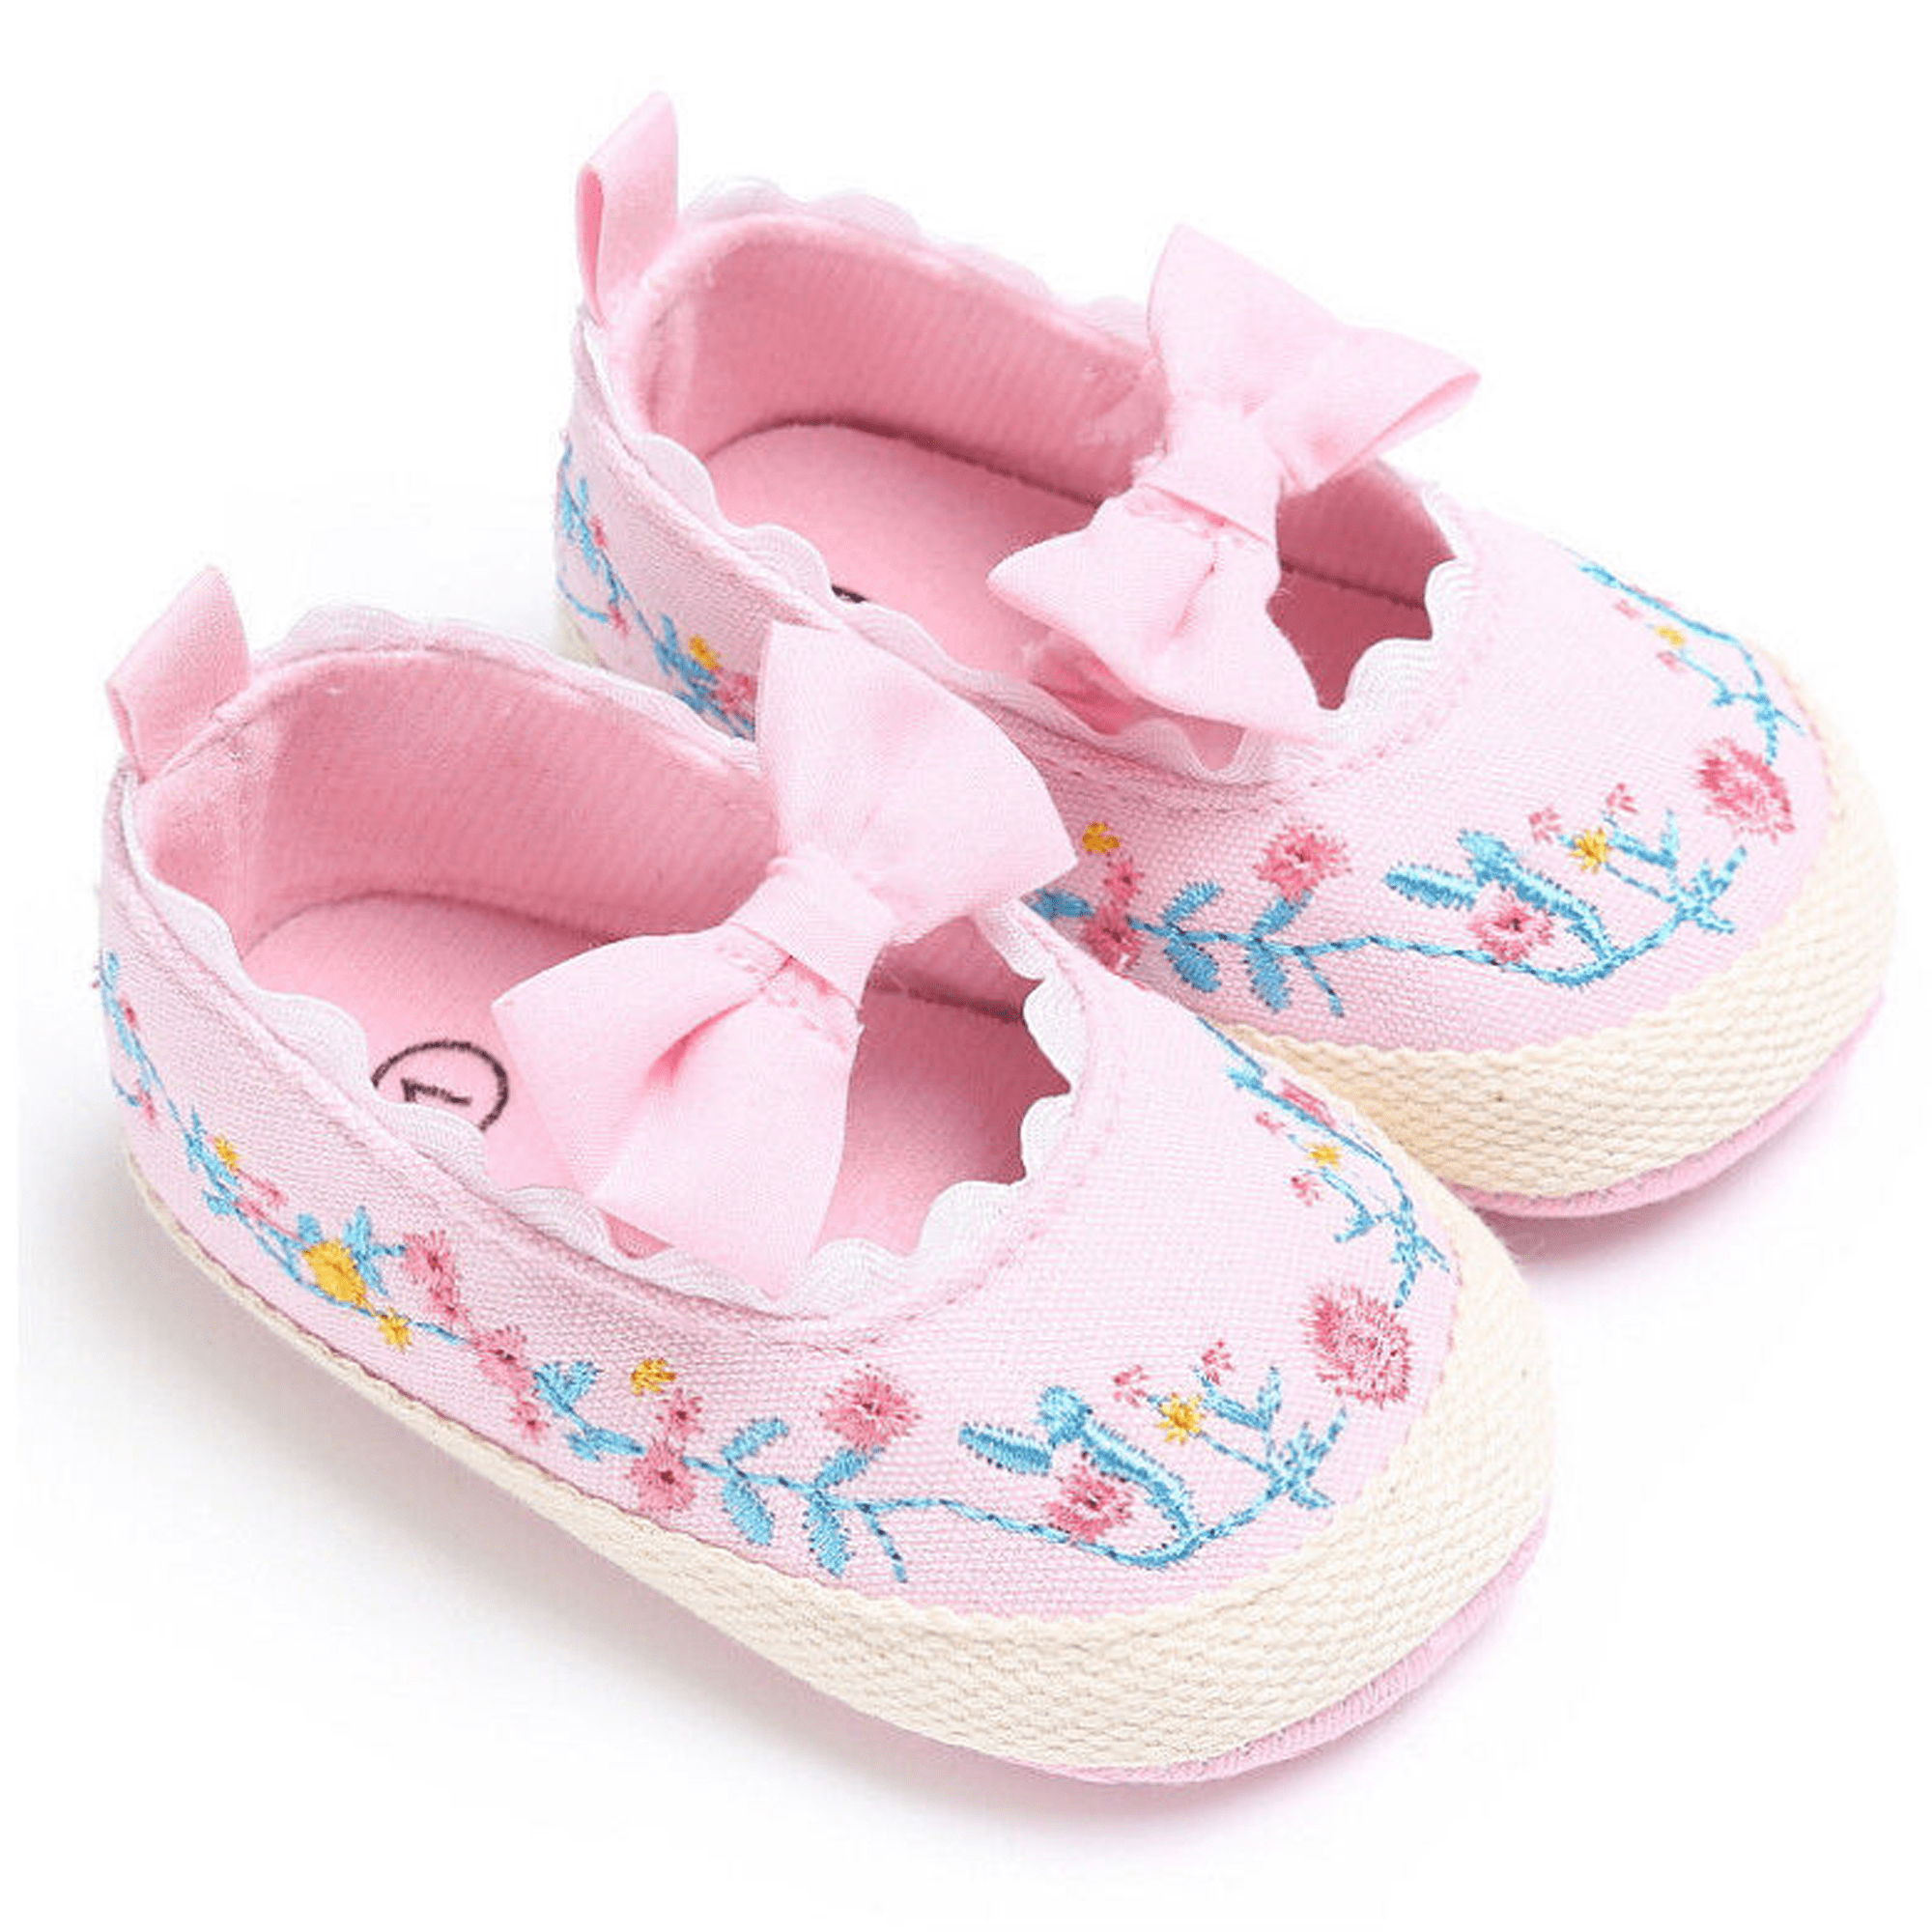 Toddler Newborn Infant Baby Girl Soft Sole Bowknot Floral Anti-slip Casual Shoes 